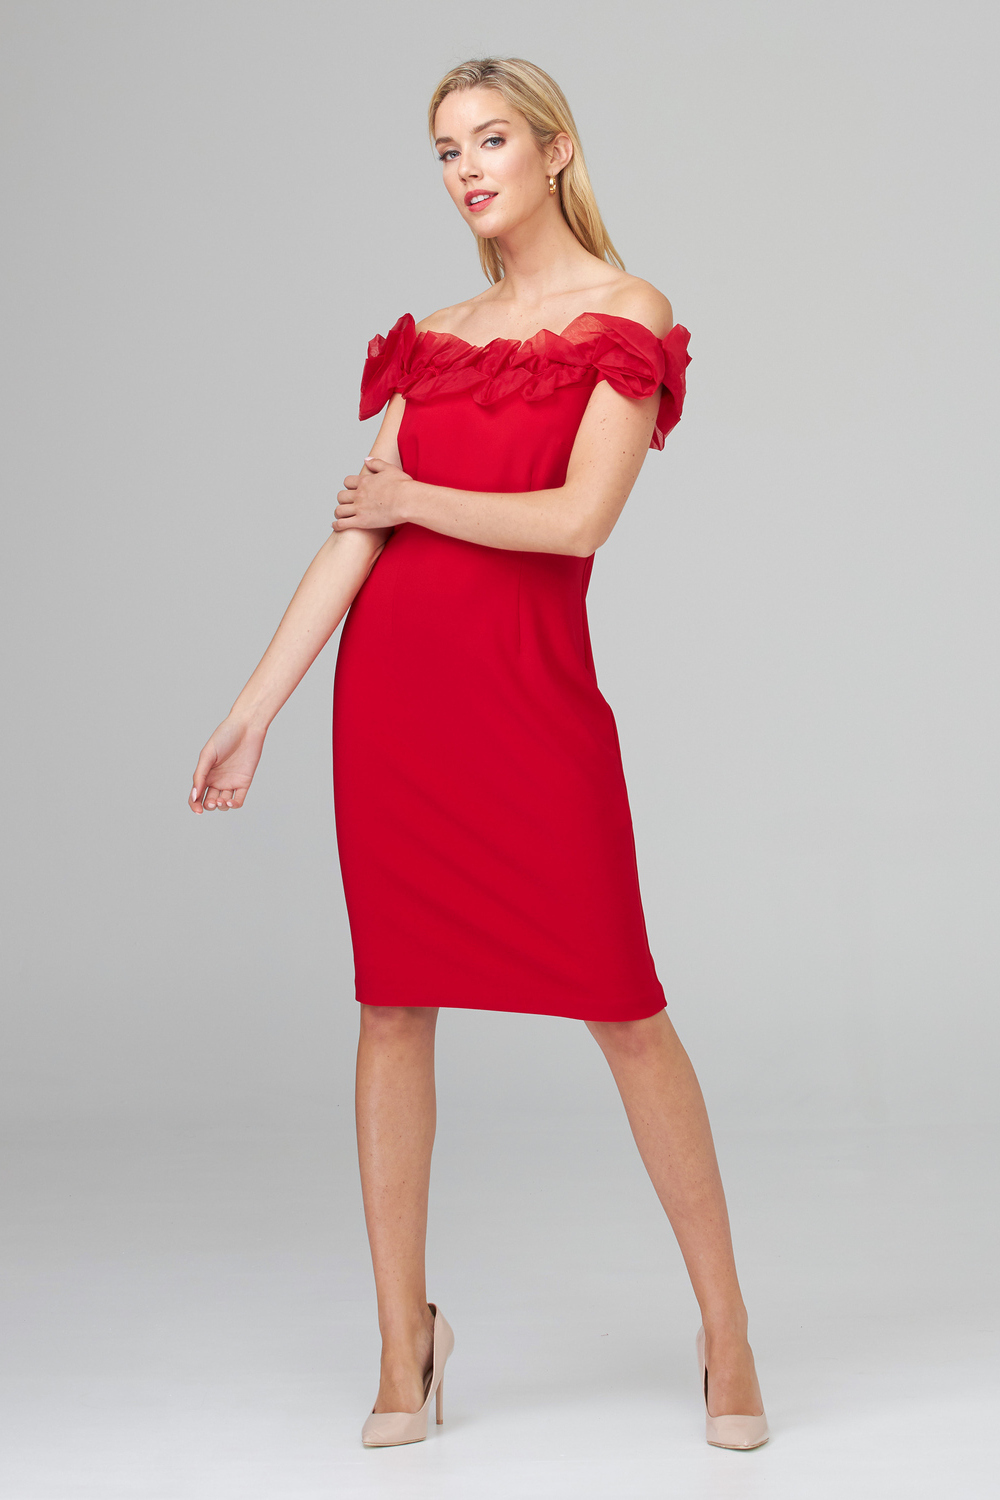 Joseph Ribkoff robe style 201302. Rouge A Levres 173